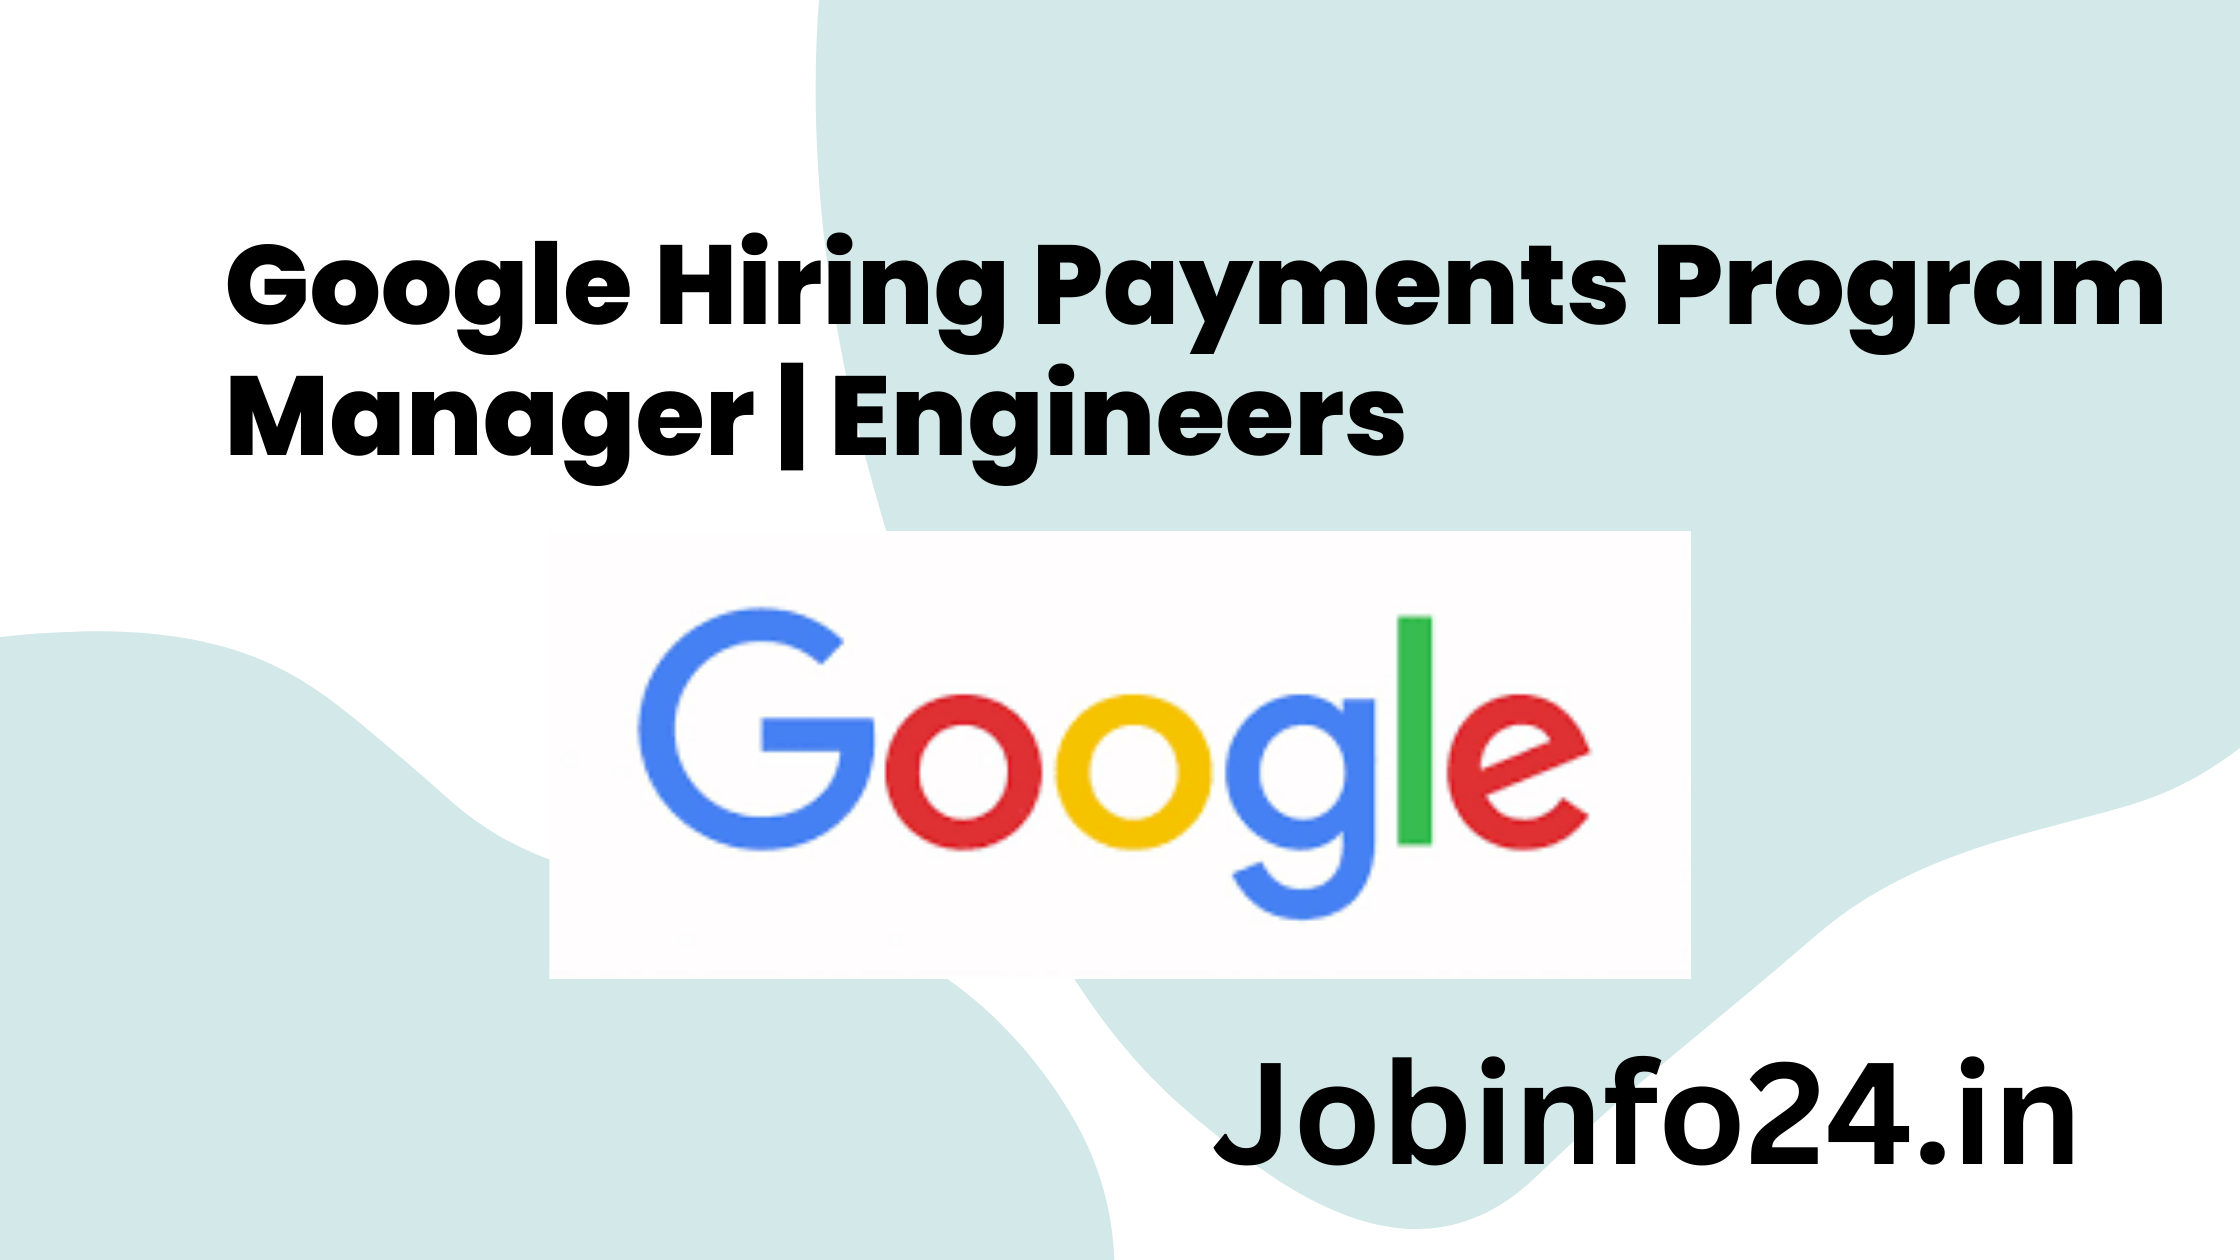 Google Hiring Payments Program Manager | Engineers